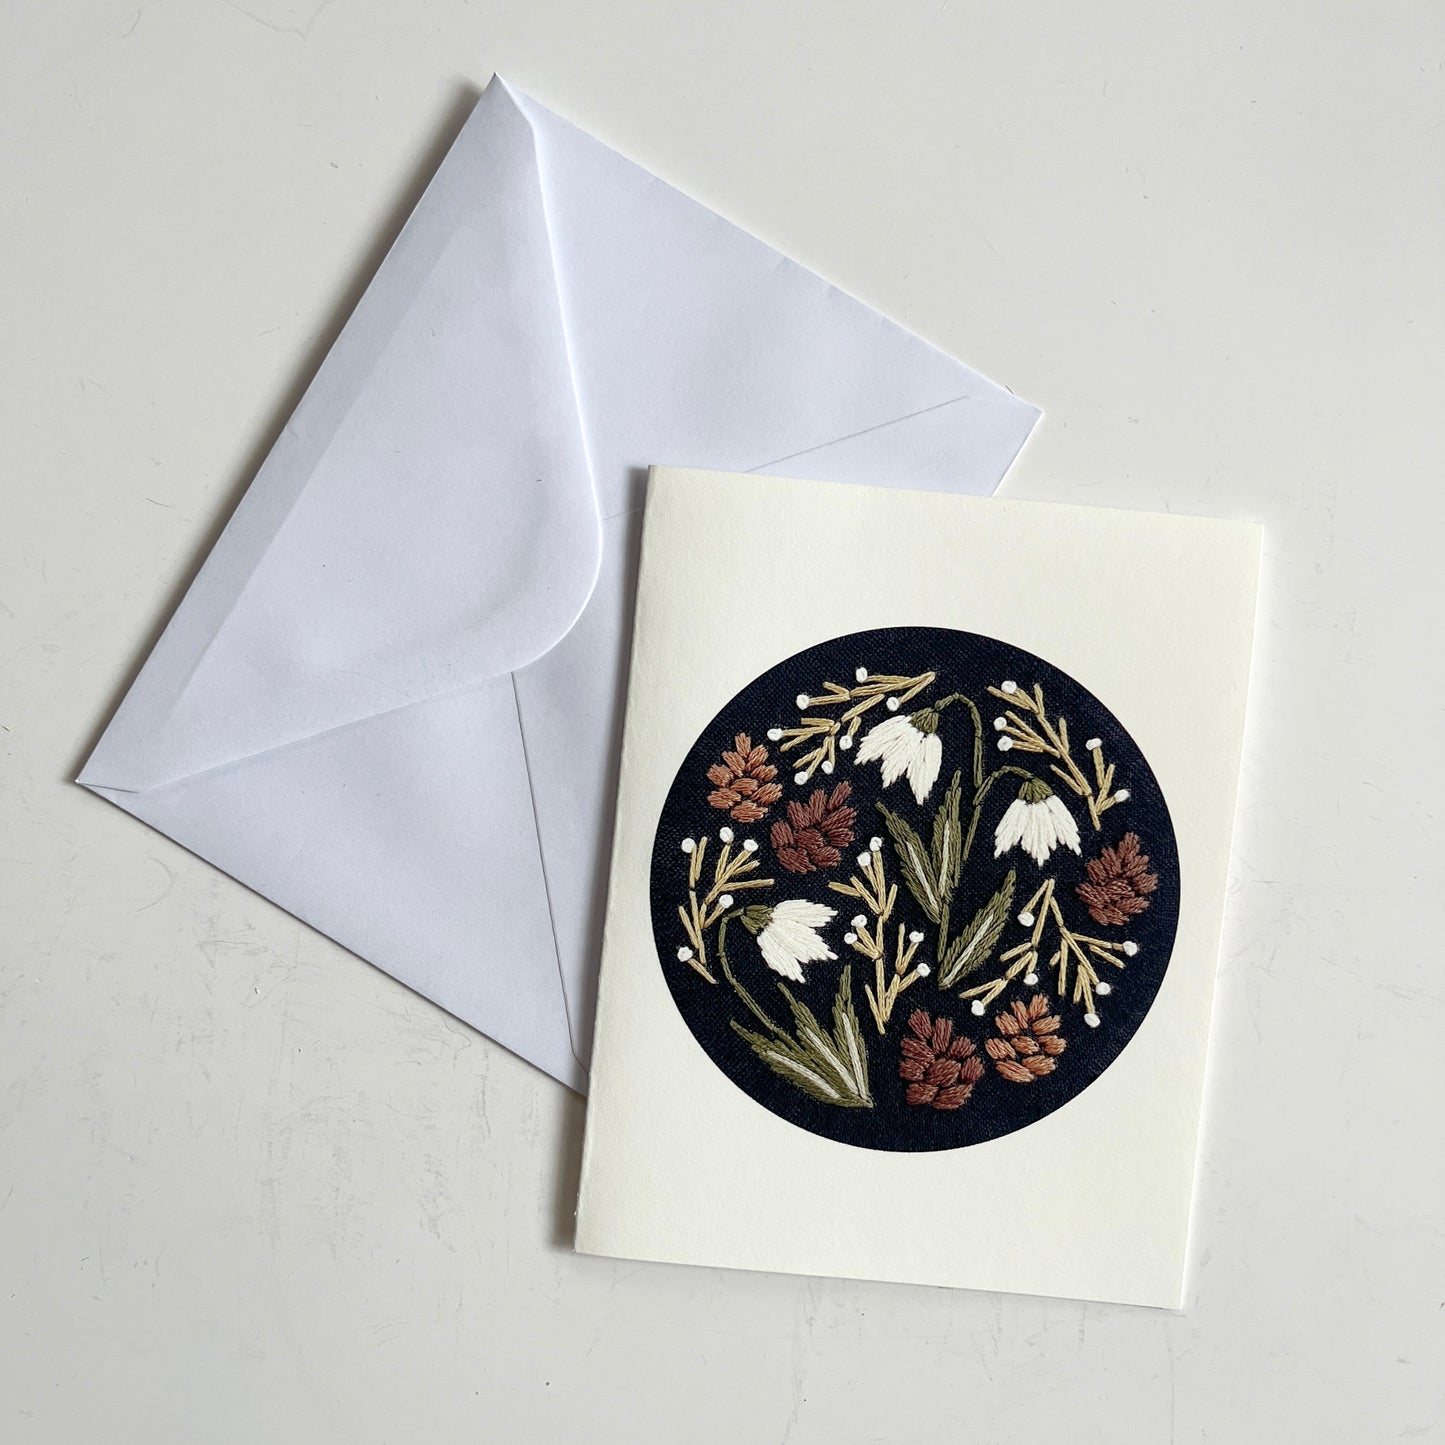 Printed Greeting Cards (my embroidery)